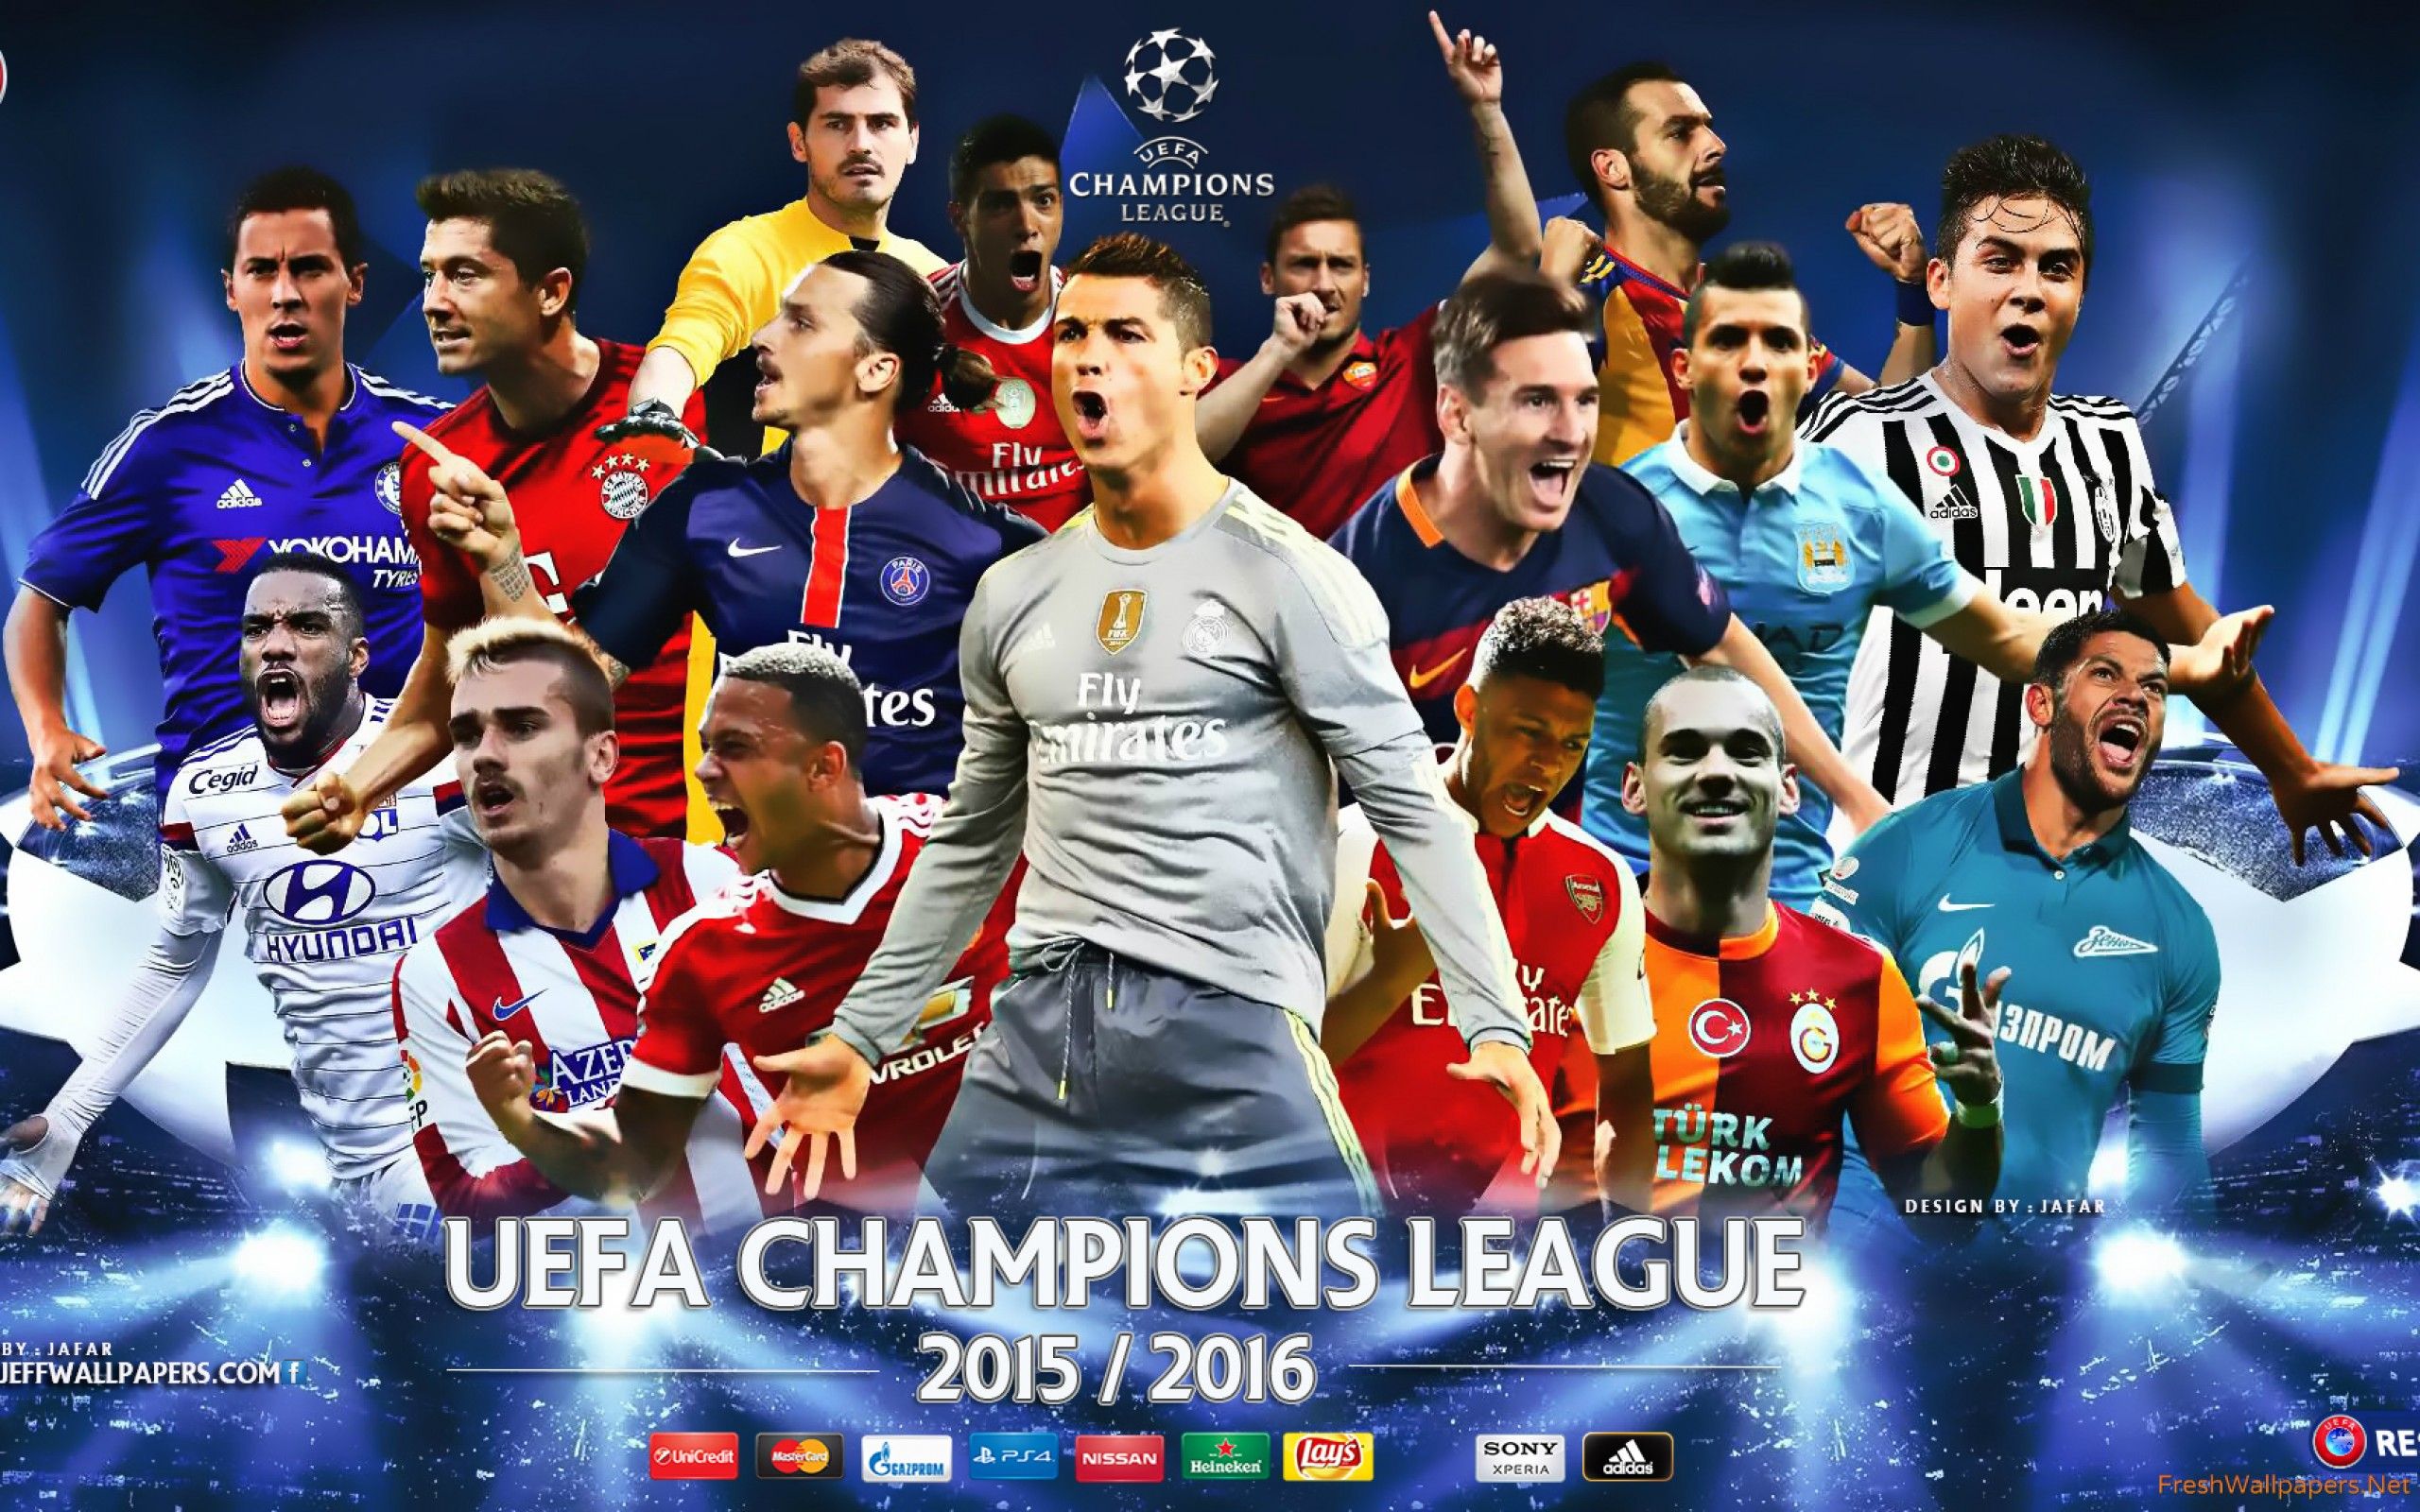 UEFA Champions League 2015 2016 Football Star Players wallpapers